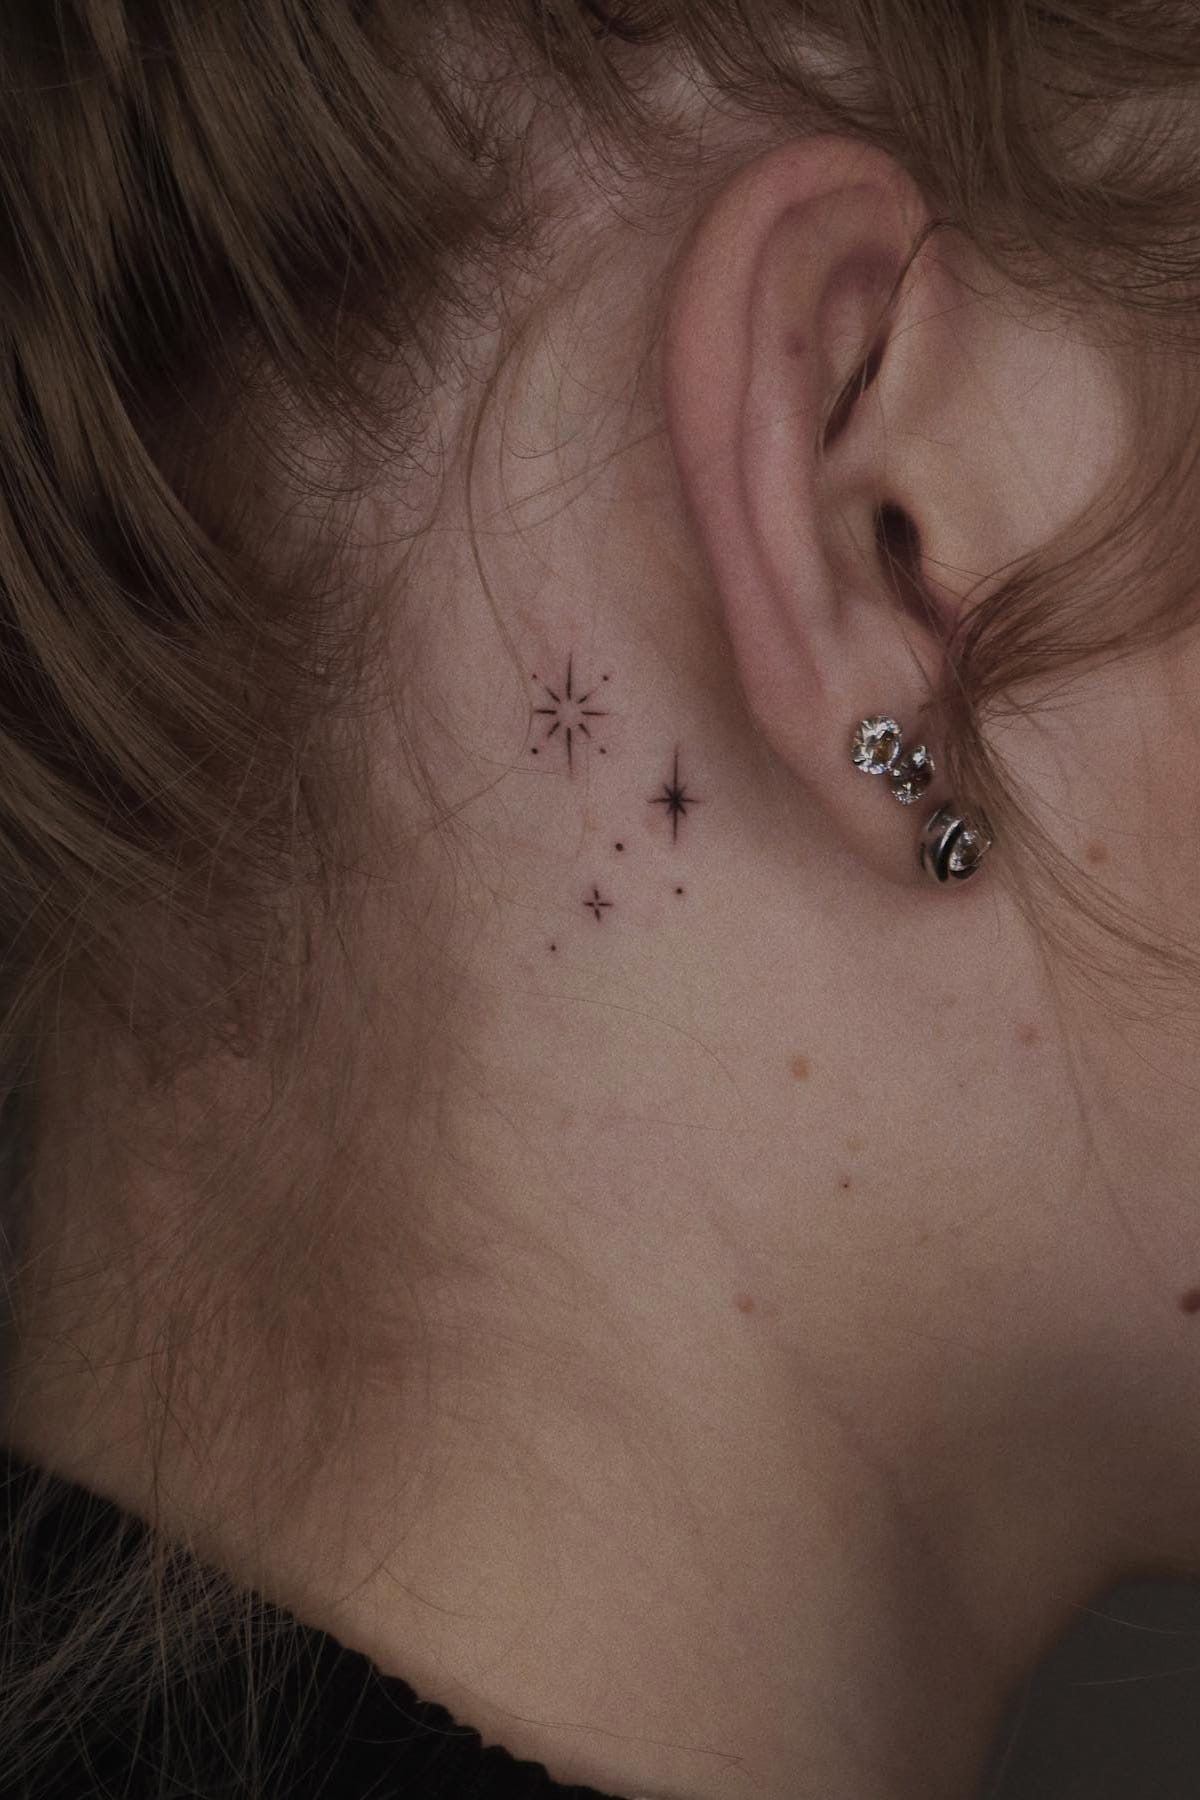 Small Star Tattoo Behind the Ear